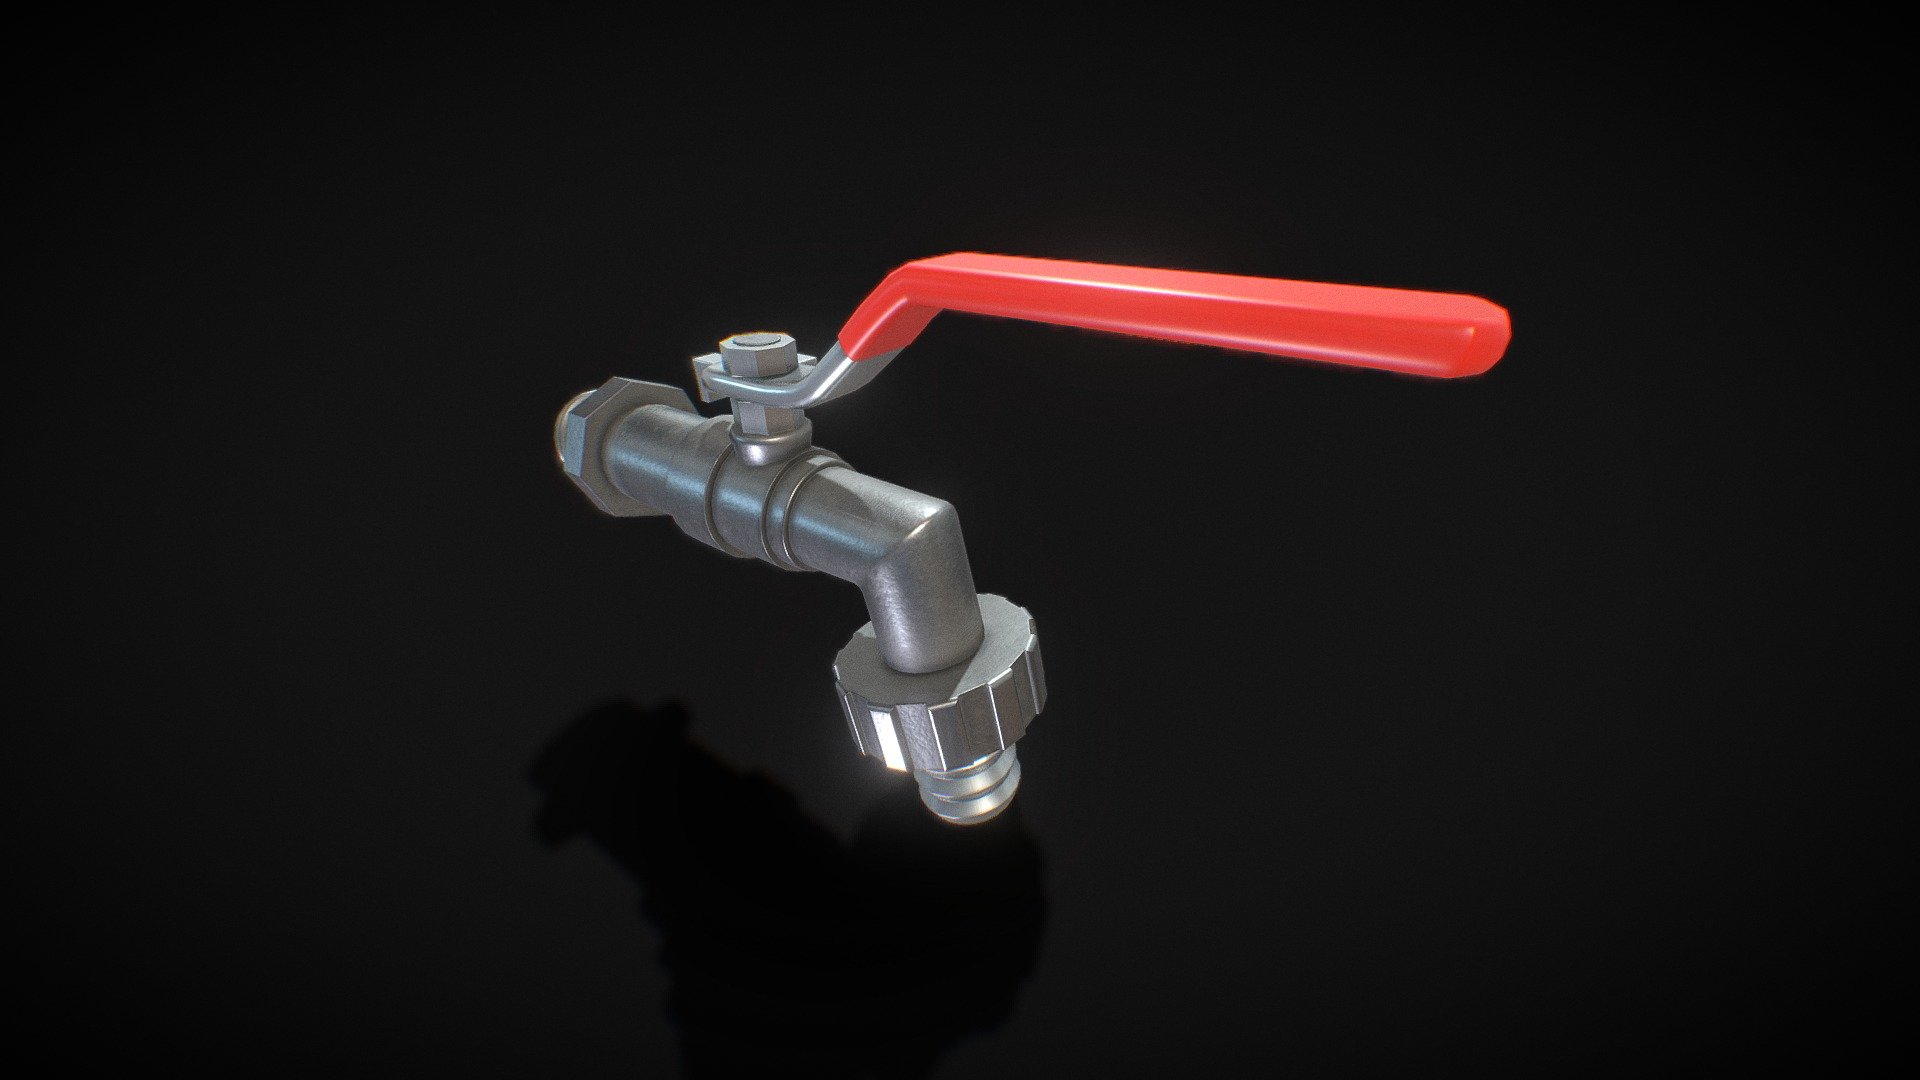 Valve Tap red 3d model ready for VirtualReality(VR),Augmented Reality(AR),games and other render engines.This lowpoly 3d model is baked with 4k resolution textures.The PBR_Maps includes- albedo,roughness,metallic and normal 3d model